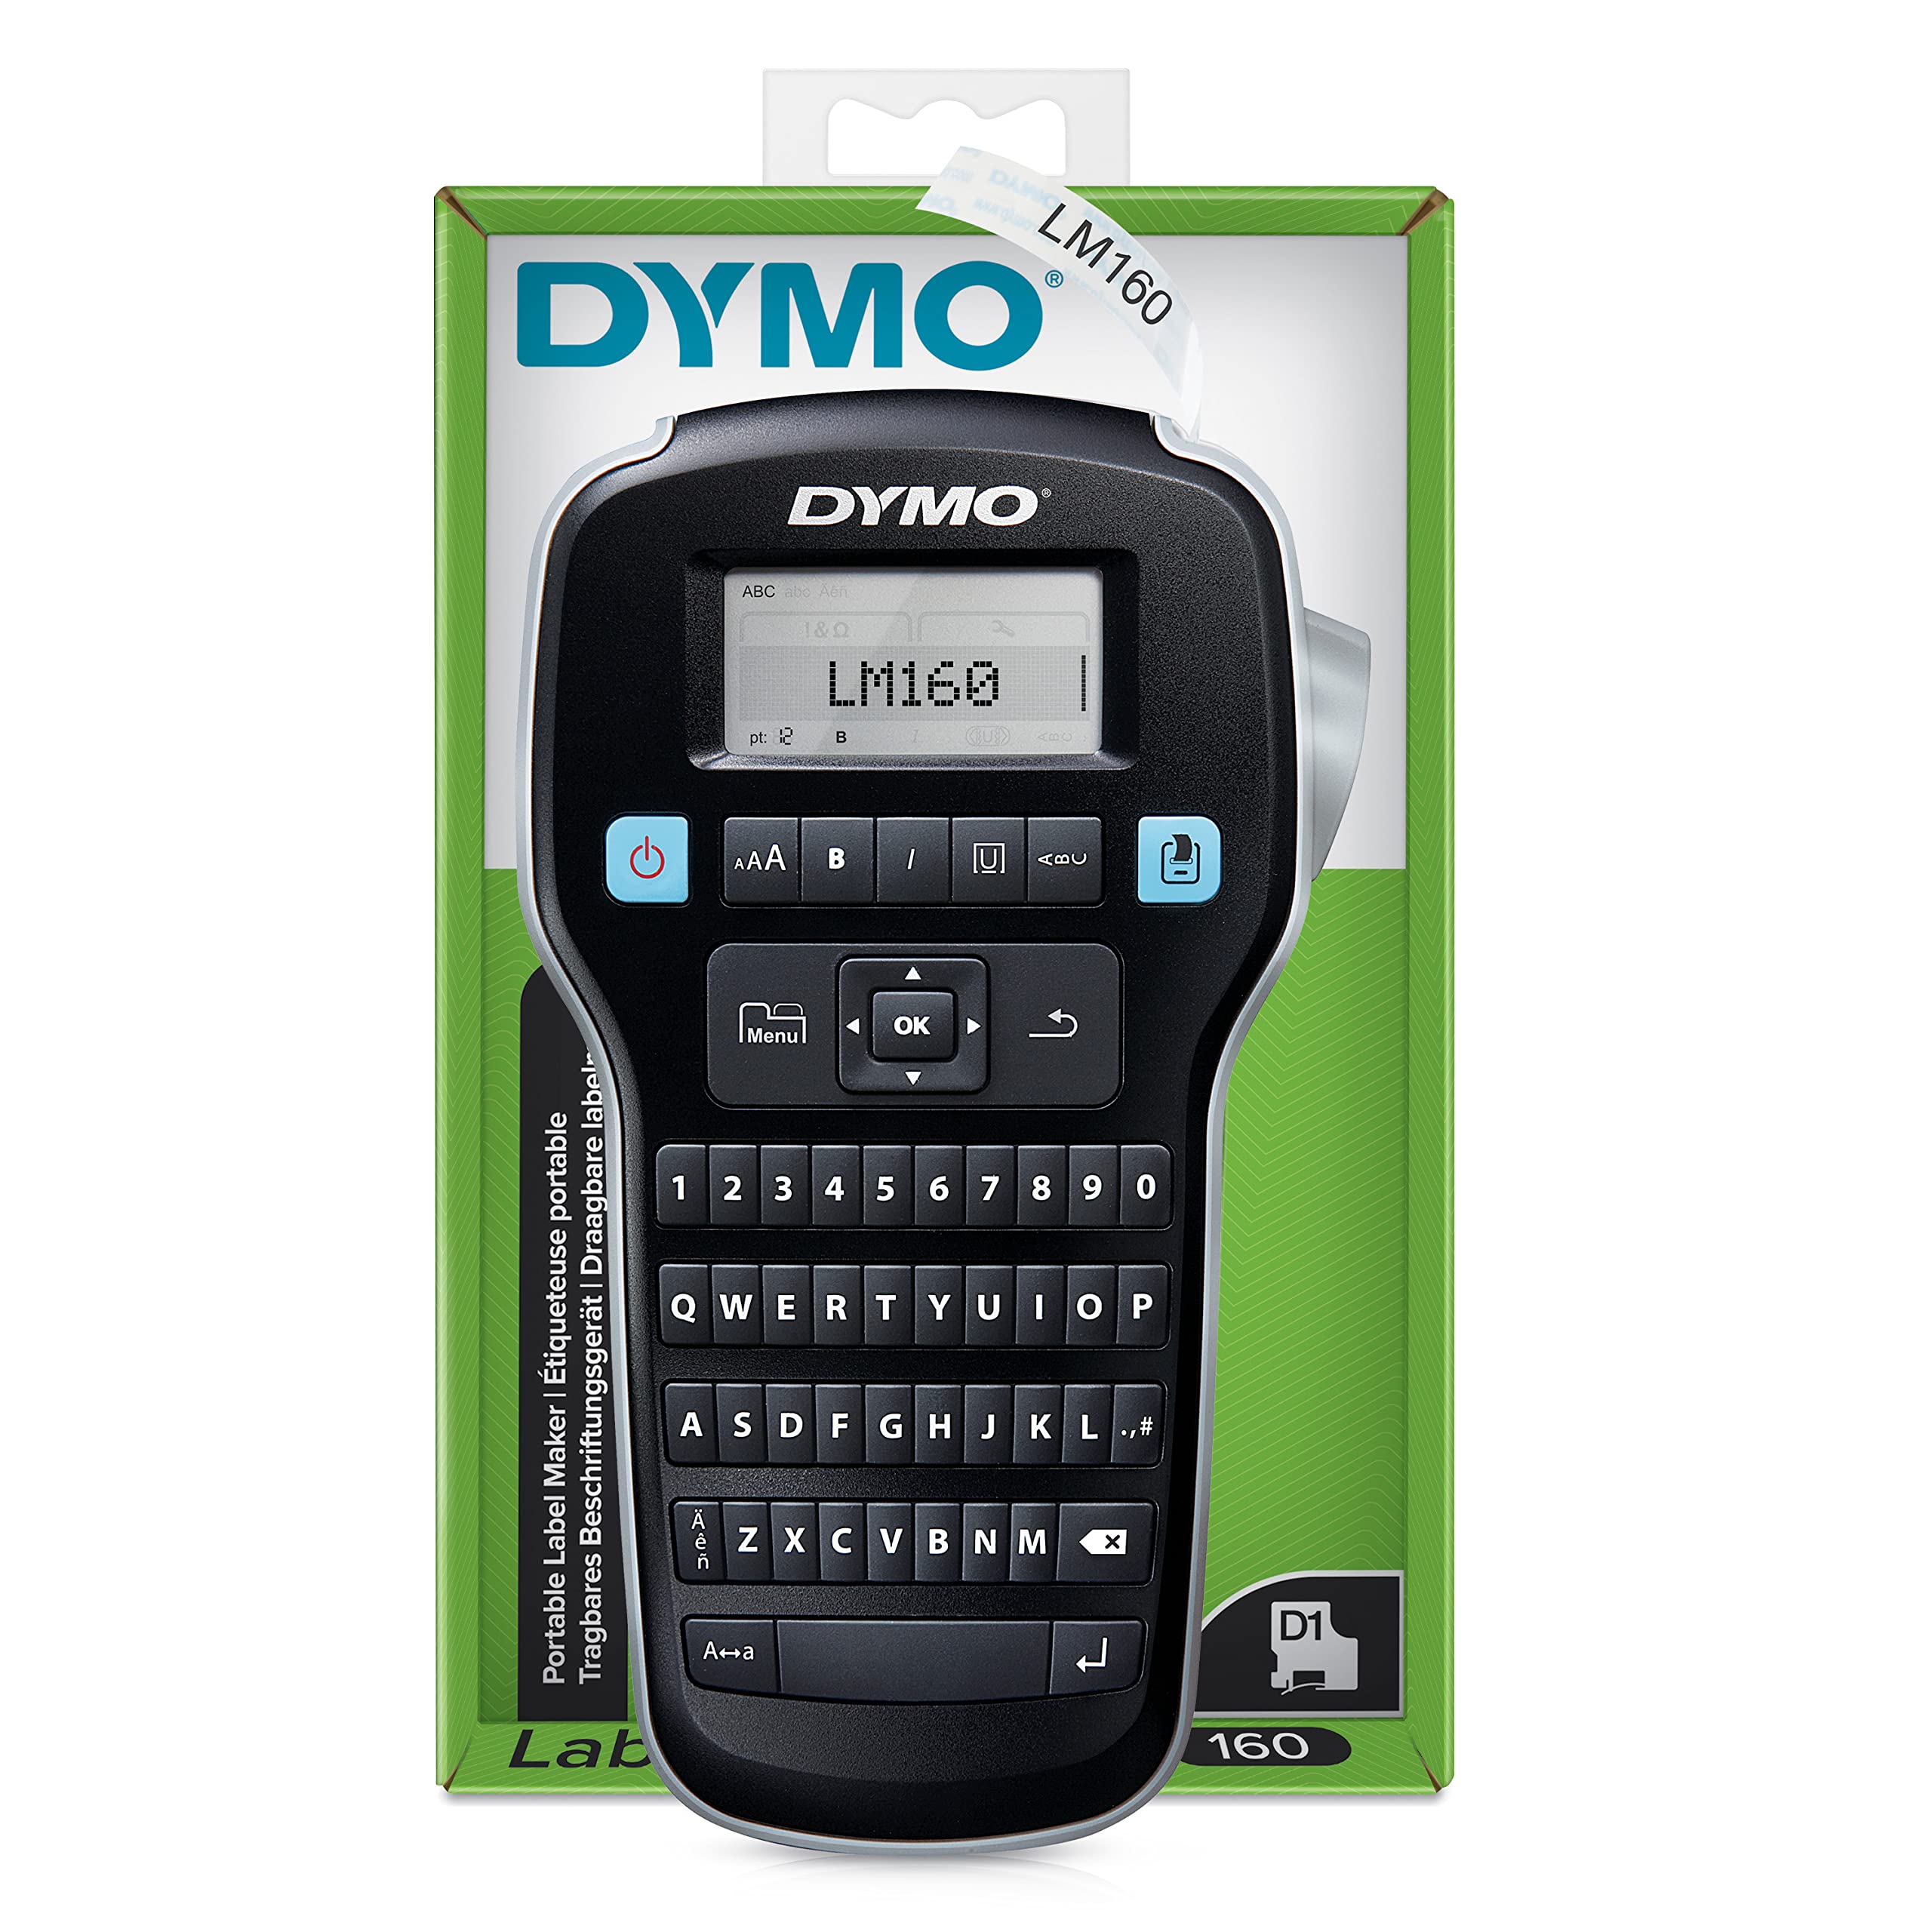 Dymo LabelManager 160 Label Maker Handheld Label Printer with QWERTY  Keyboard Includes Black  White D1 Label Tape (12mm) for Home  Office  – XavOcean